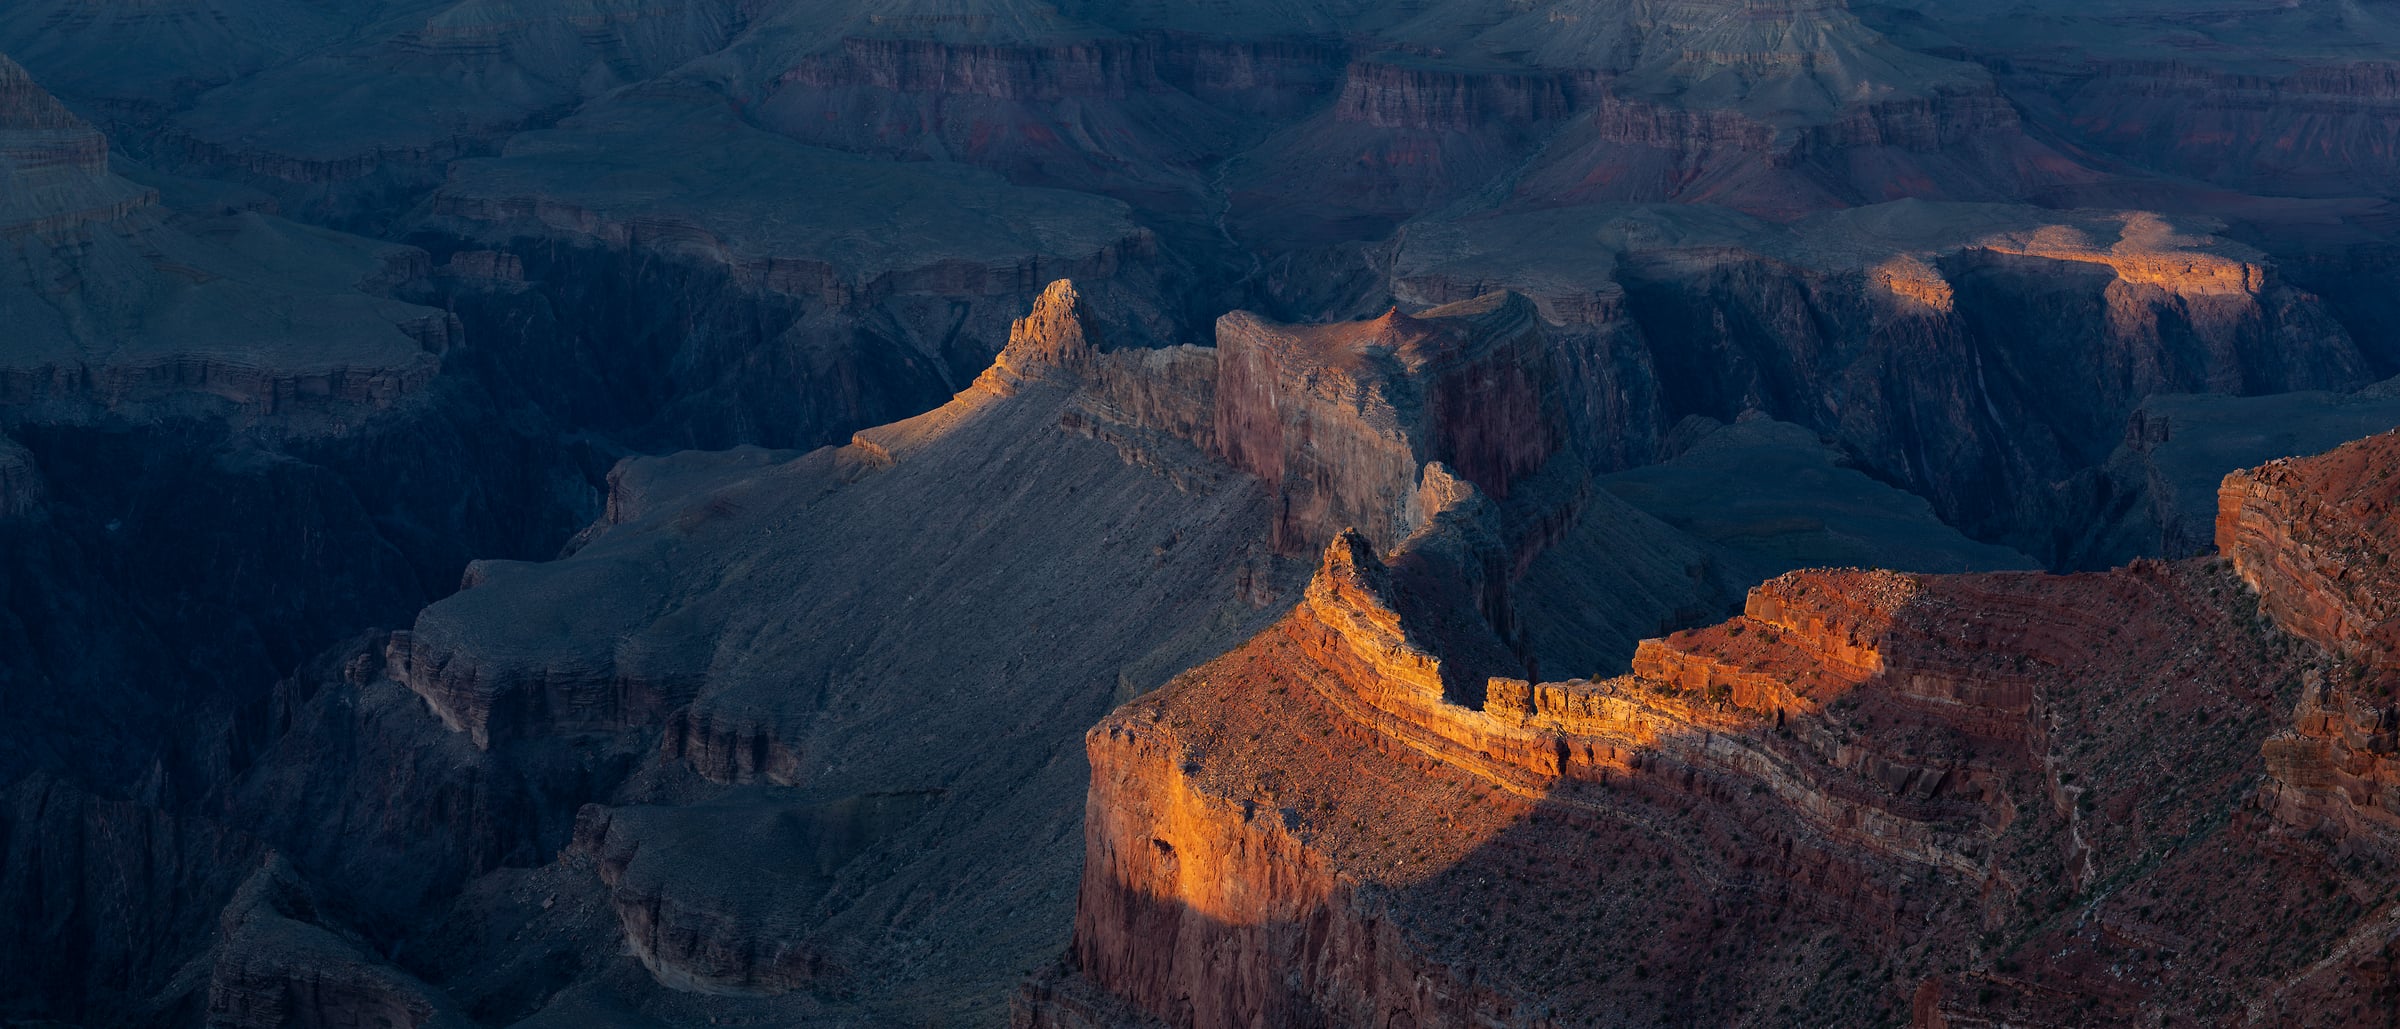 352 megapixels! A very high resolution, artistic photo print of the Grand Canyon at sunset; landscape photograph created by Greg Probst in Grand Canyon National Park, Arizona